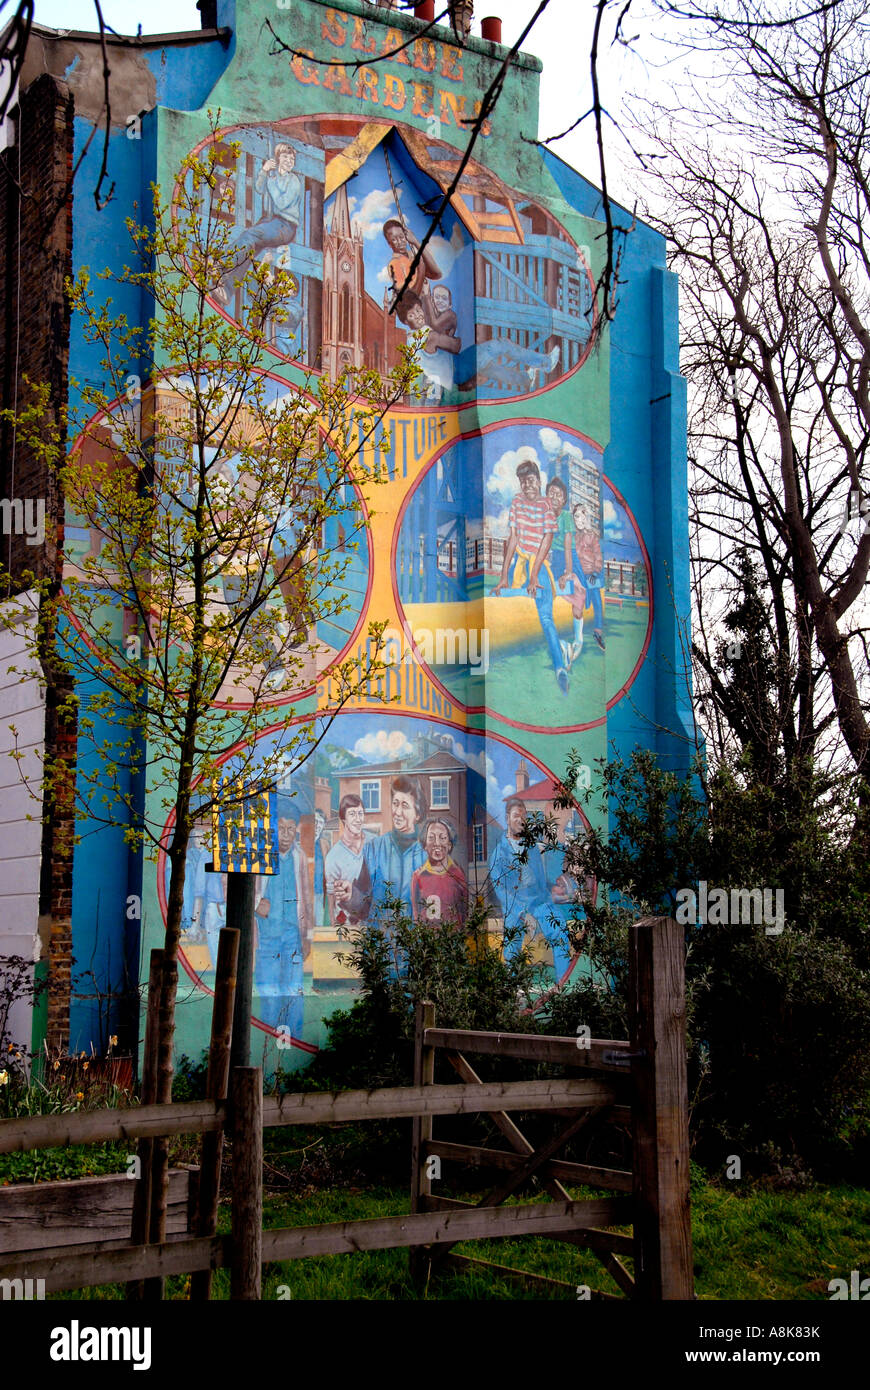 Wall mural of adventure playground on side of house by Slade Garden in Brixton South London. Stock Photo